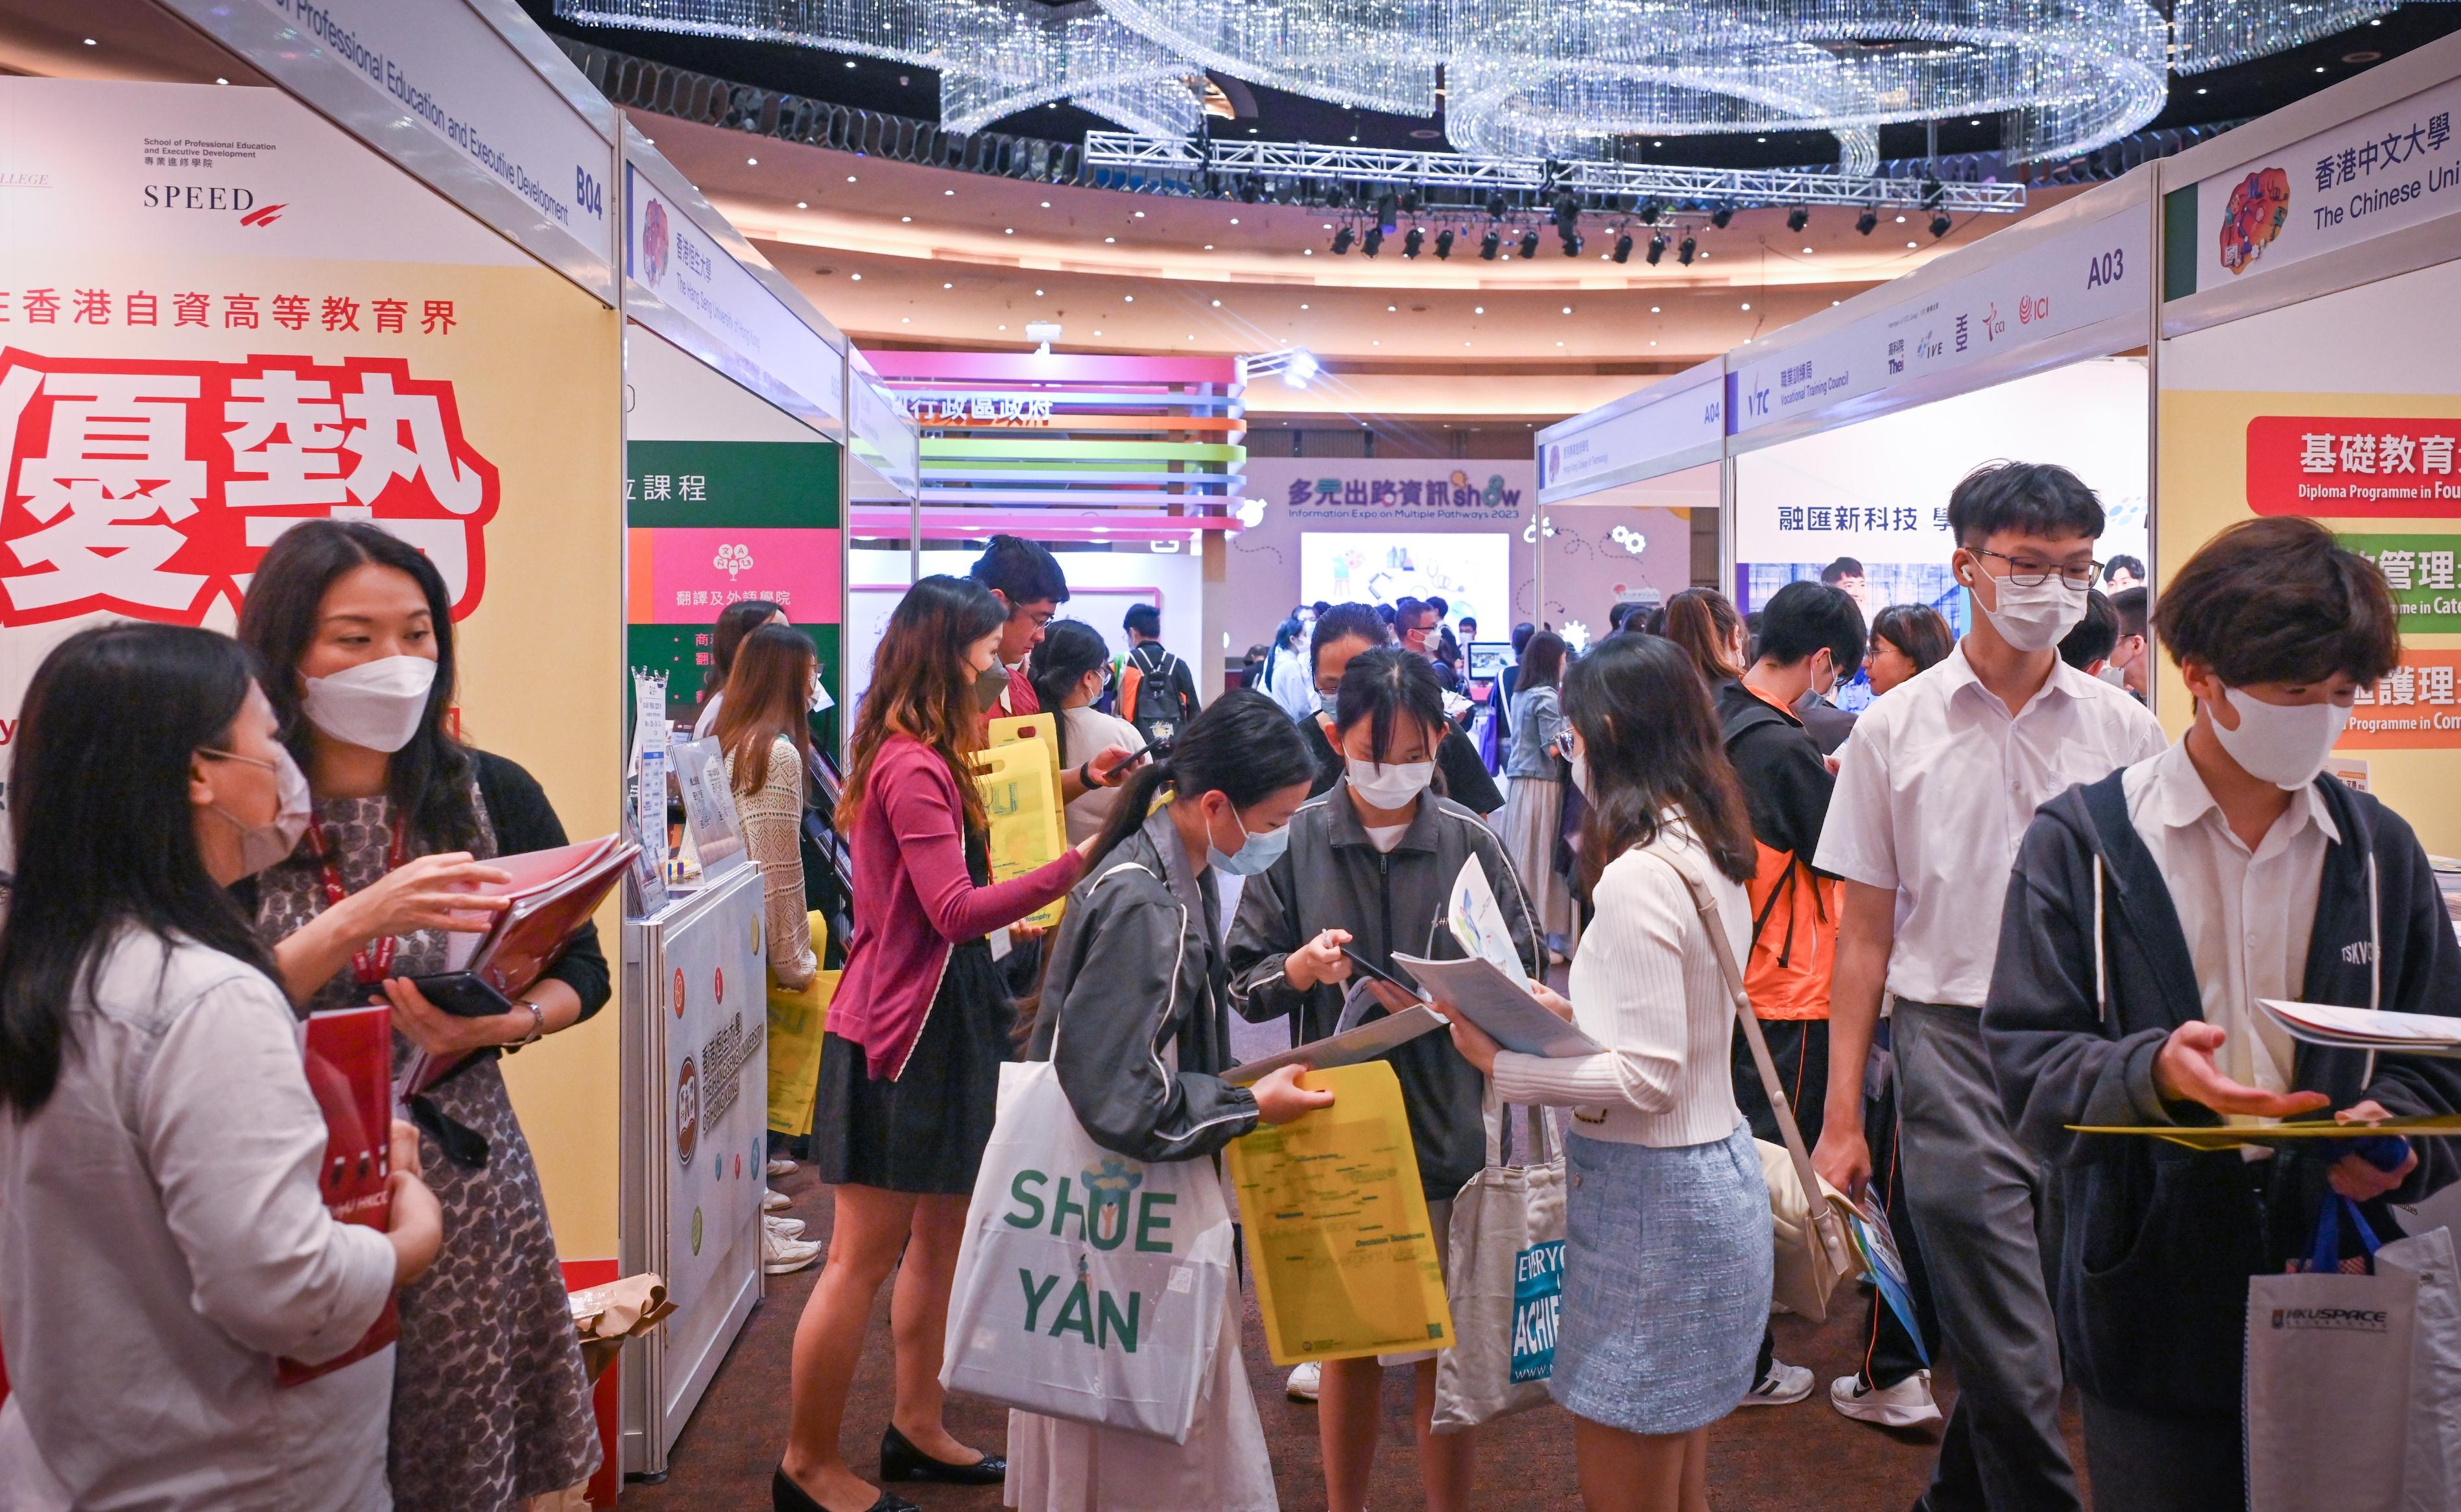 The Education Bureau is holding the Information Expo on Multiple Pathways 2023 today and tomorrow (May 19 and 20) at the Kowloonbay International Trade & Exhibition Centre. Photo shows members of the public visiting the exhibition booths to acquire information on further studies and career pathways.